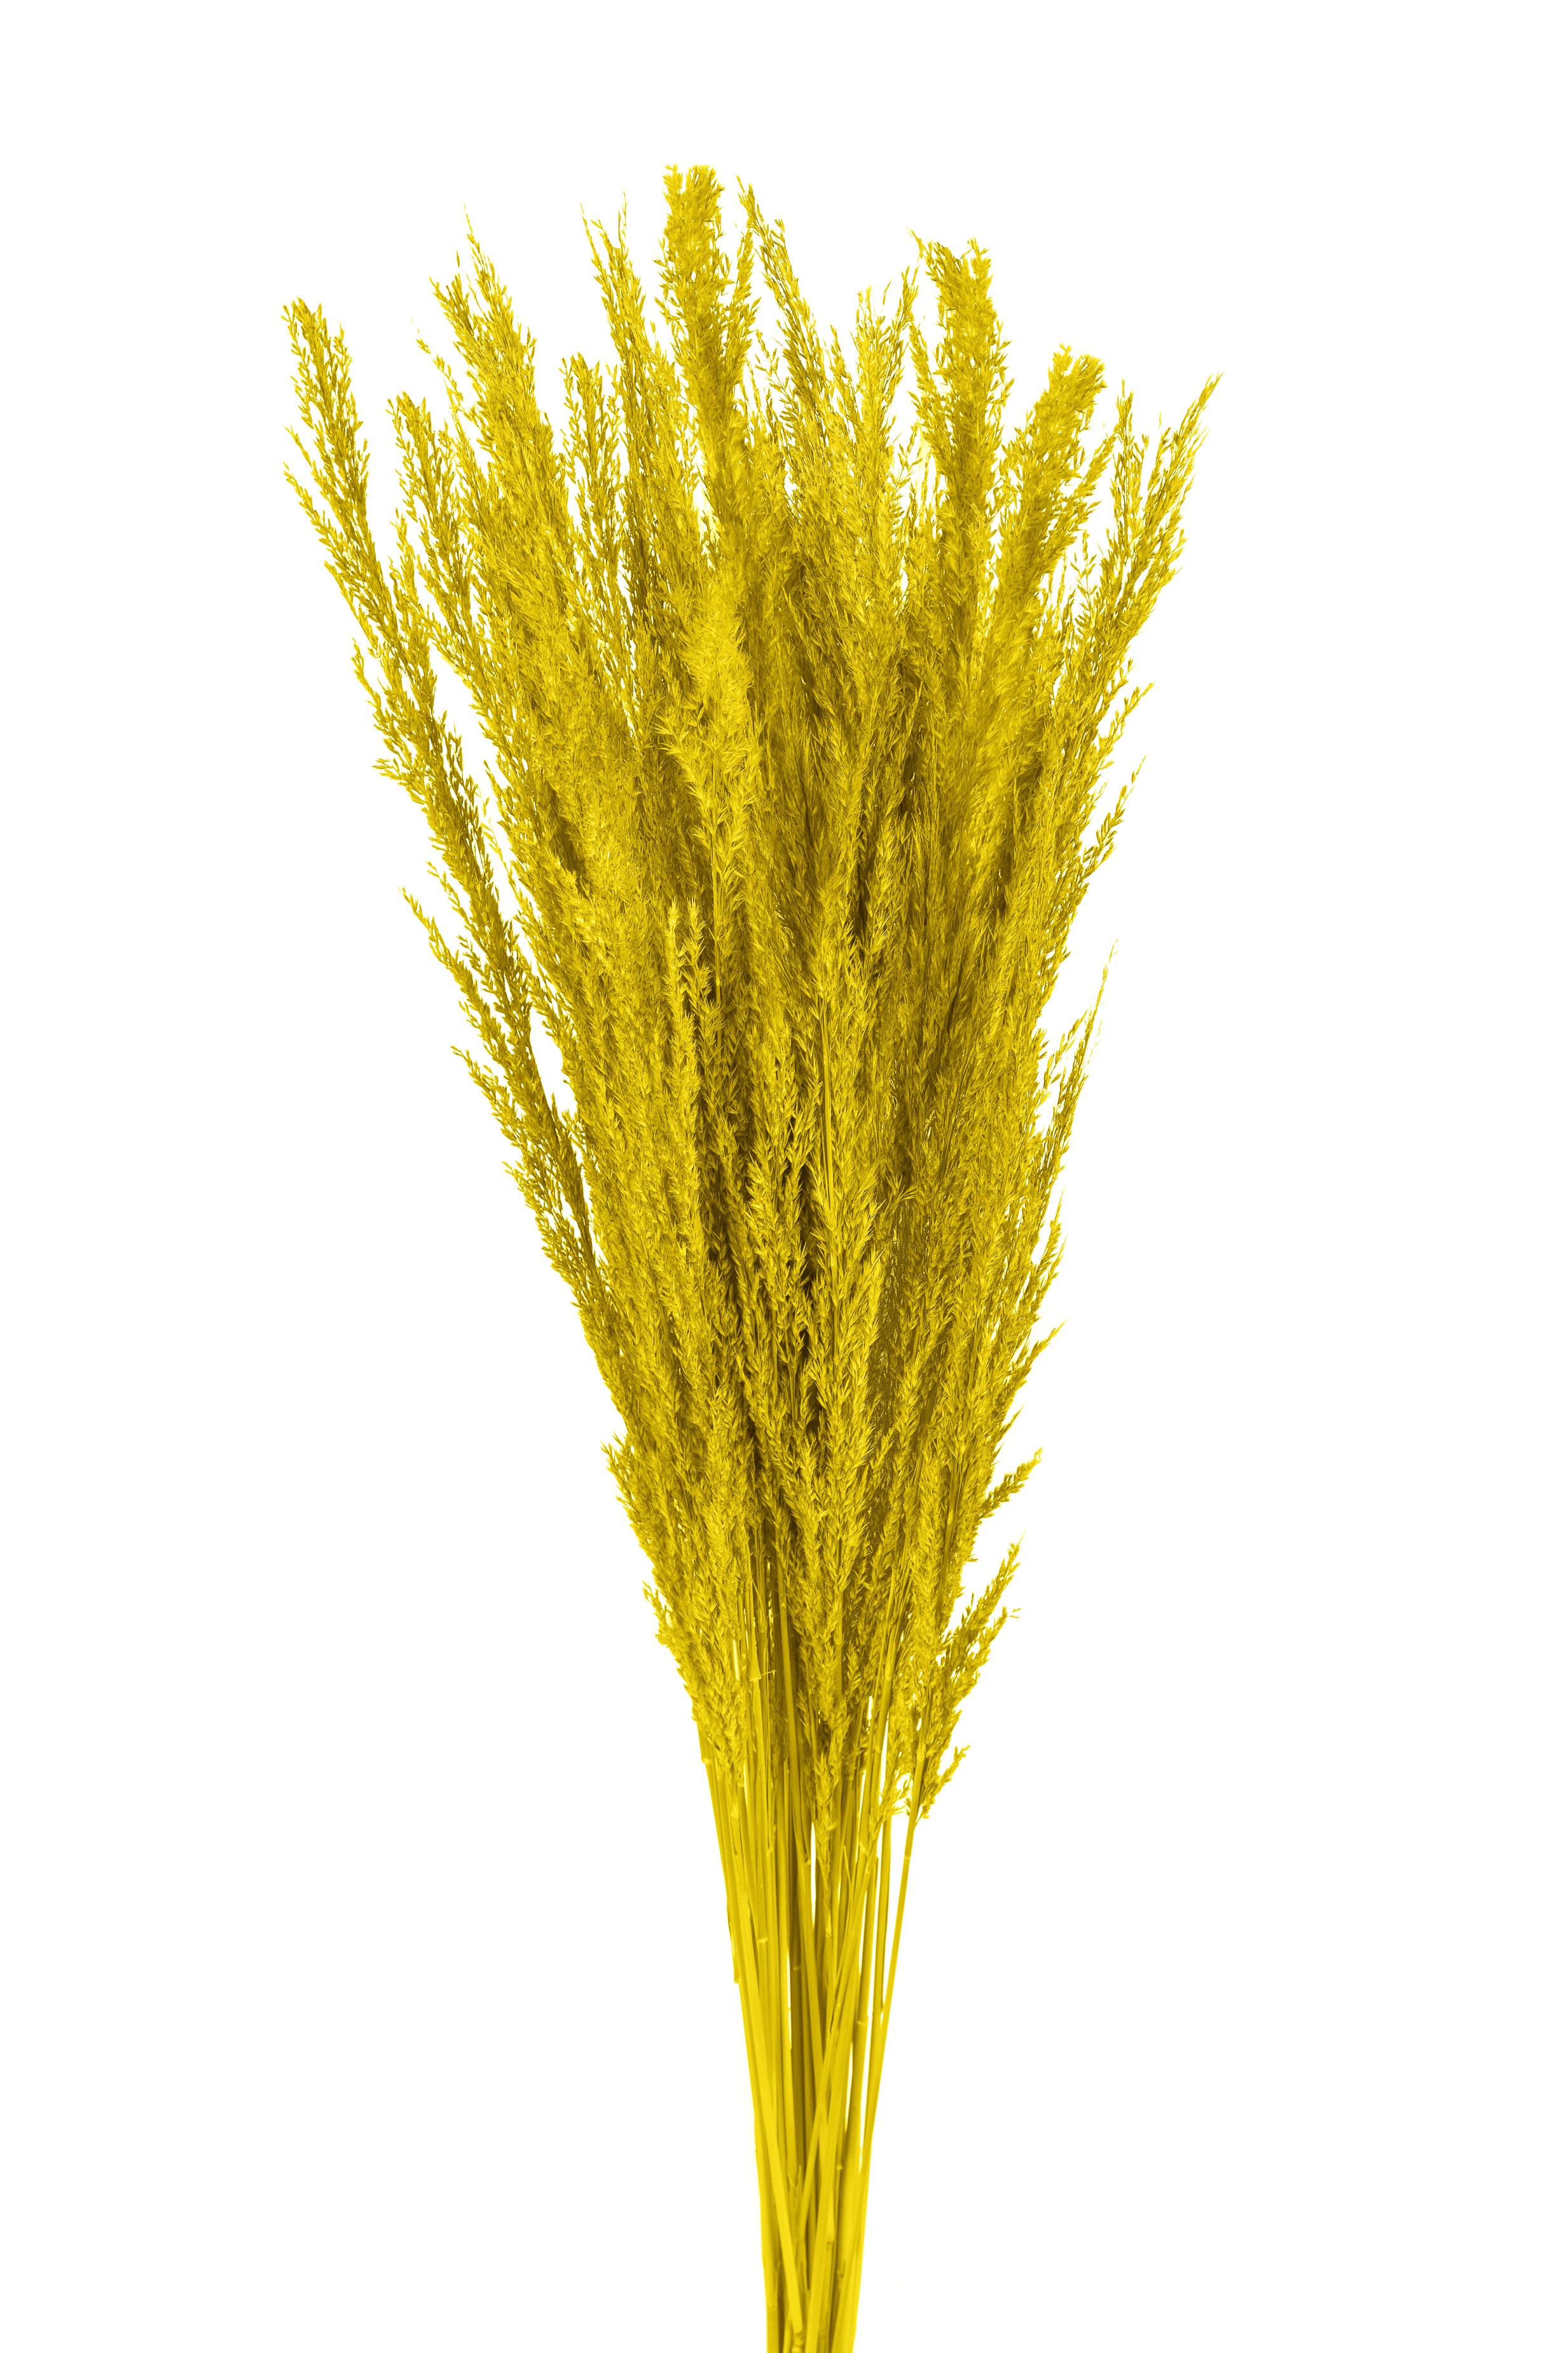 NATURAL PRODUCTS DRIED FLOWERS AND ERBS, COLORED GRASS AND FLOWERS, PIUME ERIANTHUS 20 PZ CA 110 C.A SAC